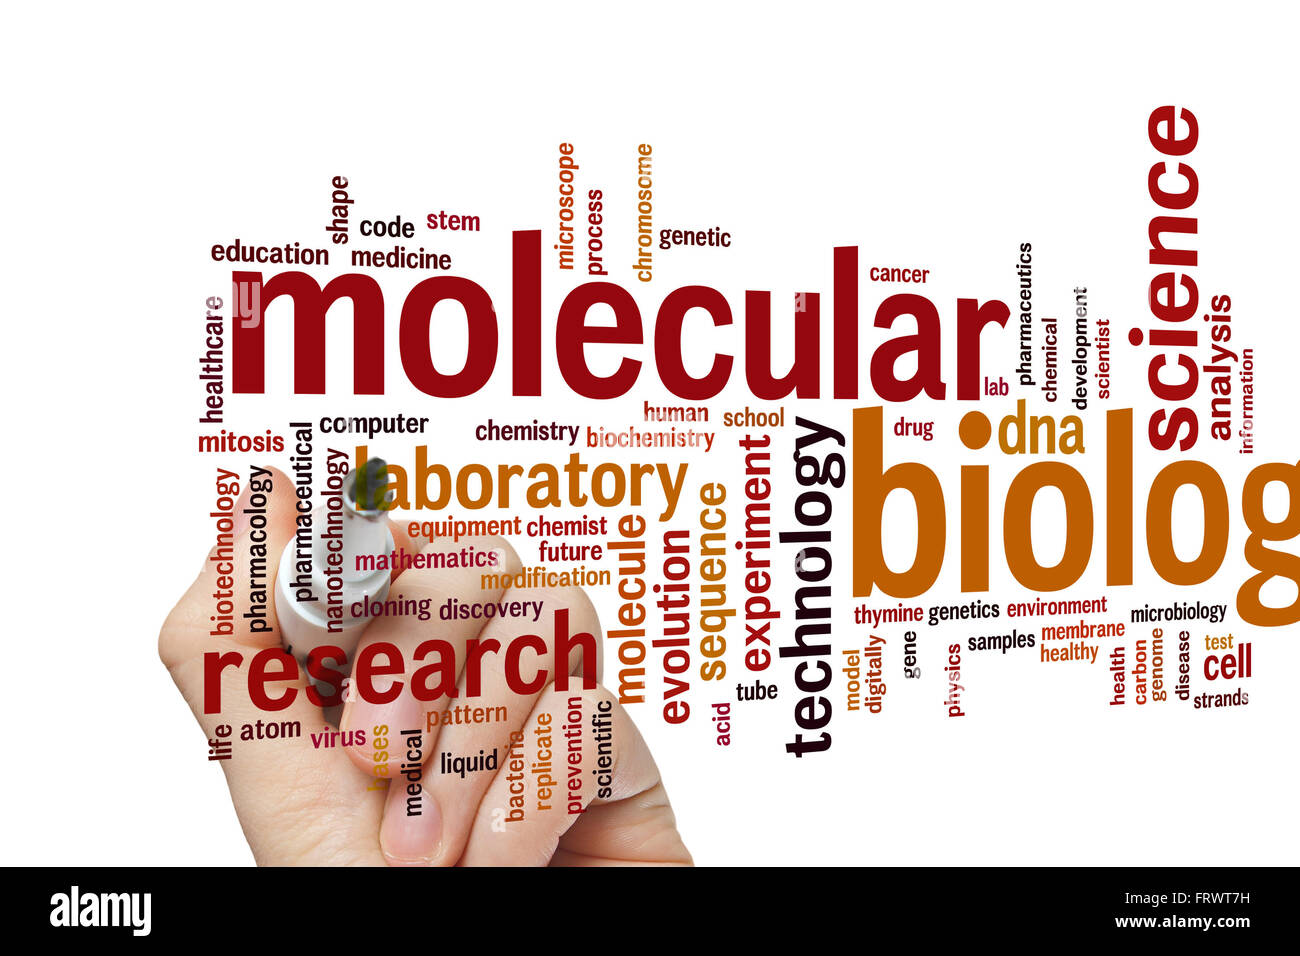 Molecular biology concept word cloud background Stock Photo